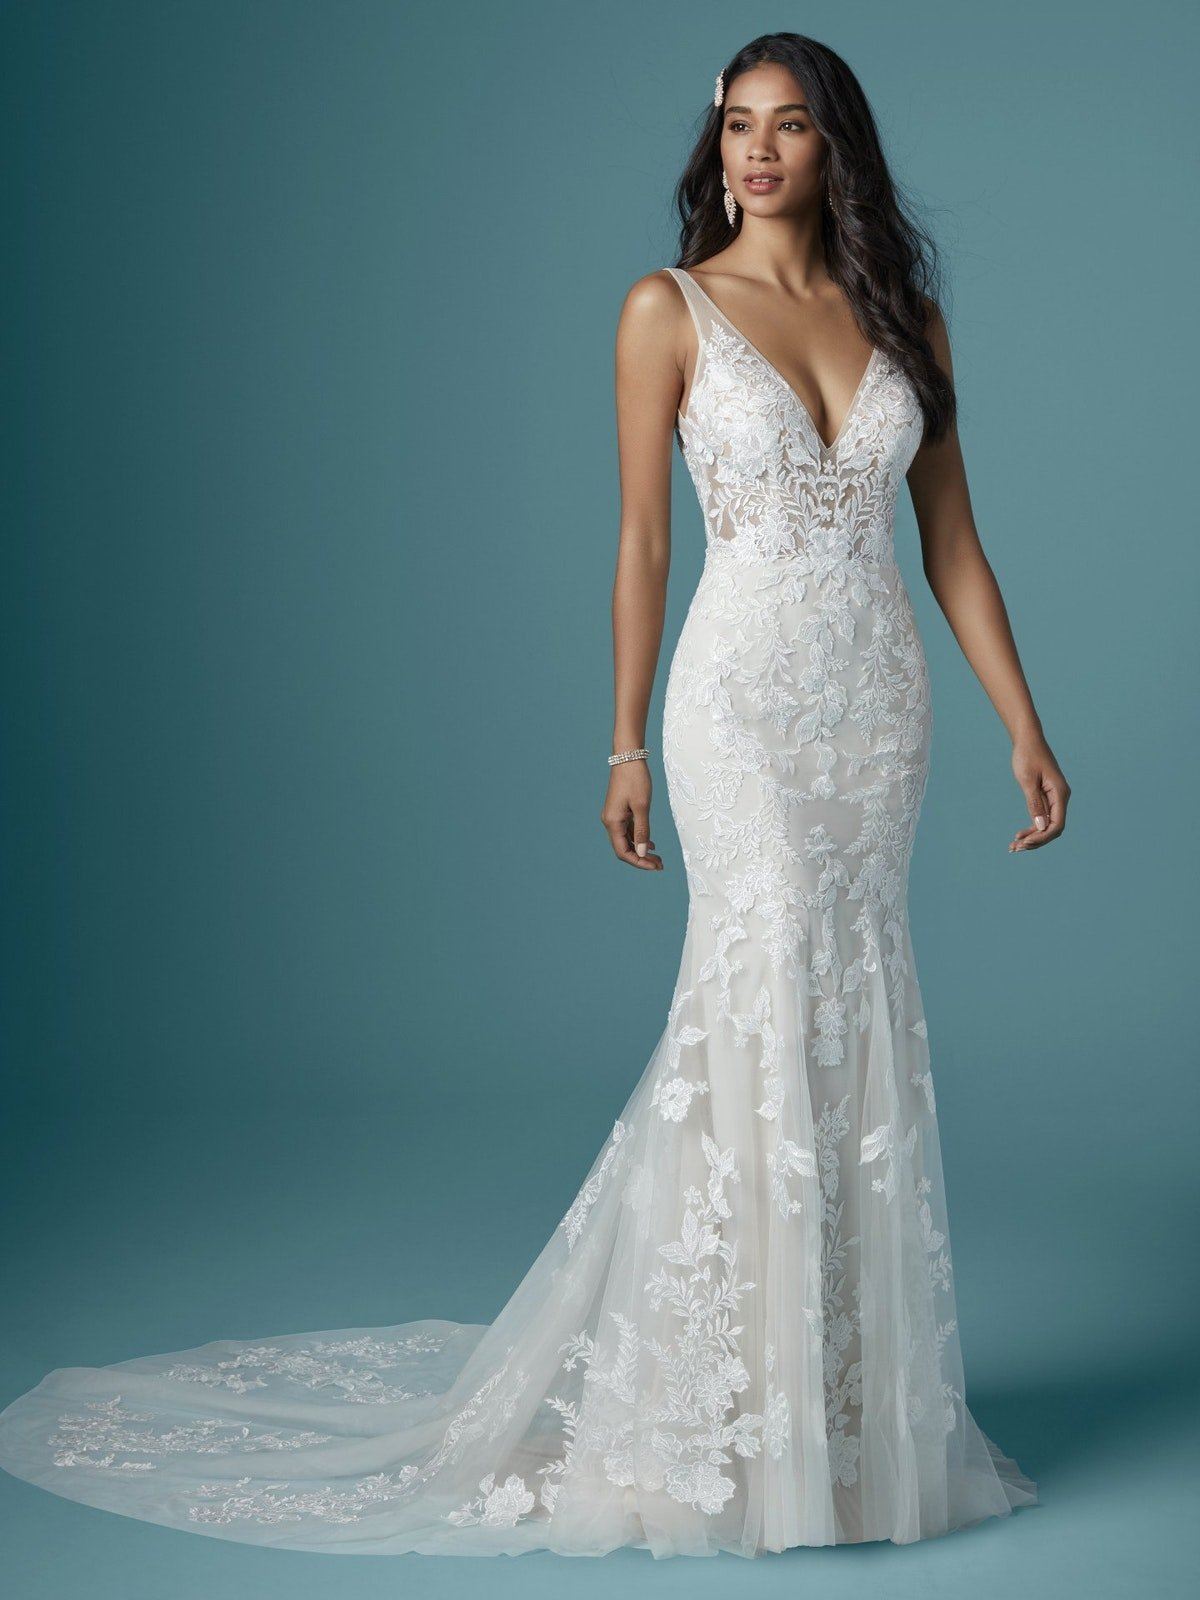 Maggie Sottero Pop Up at Volle’s Bridal &amp; Boutique Image